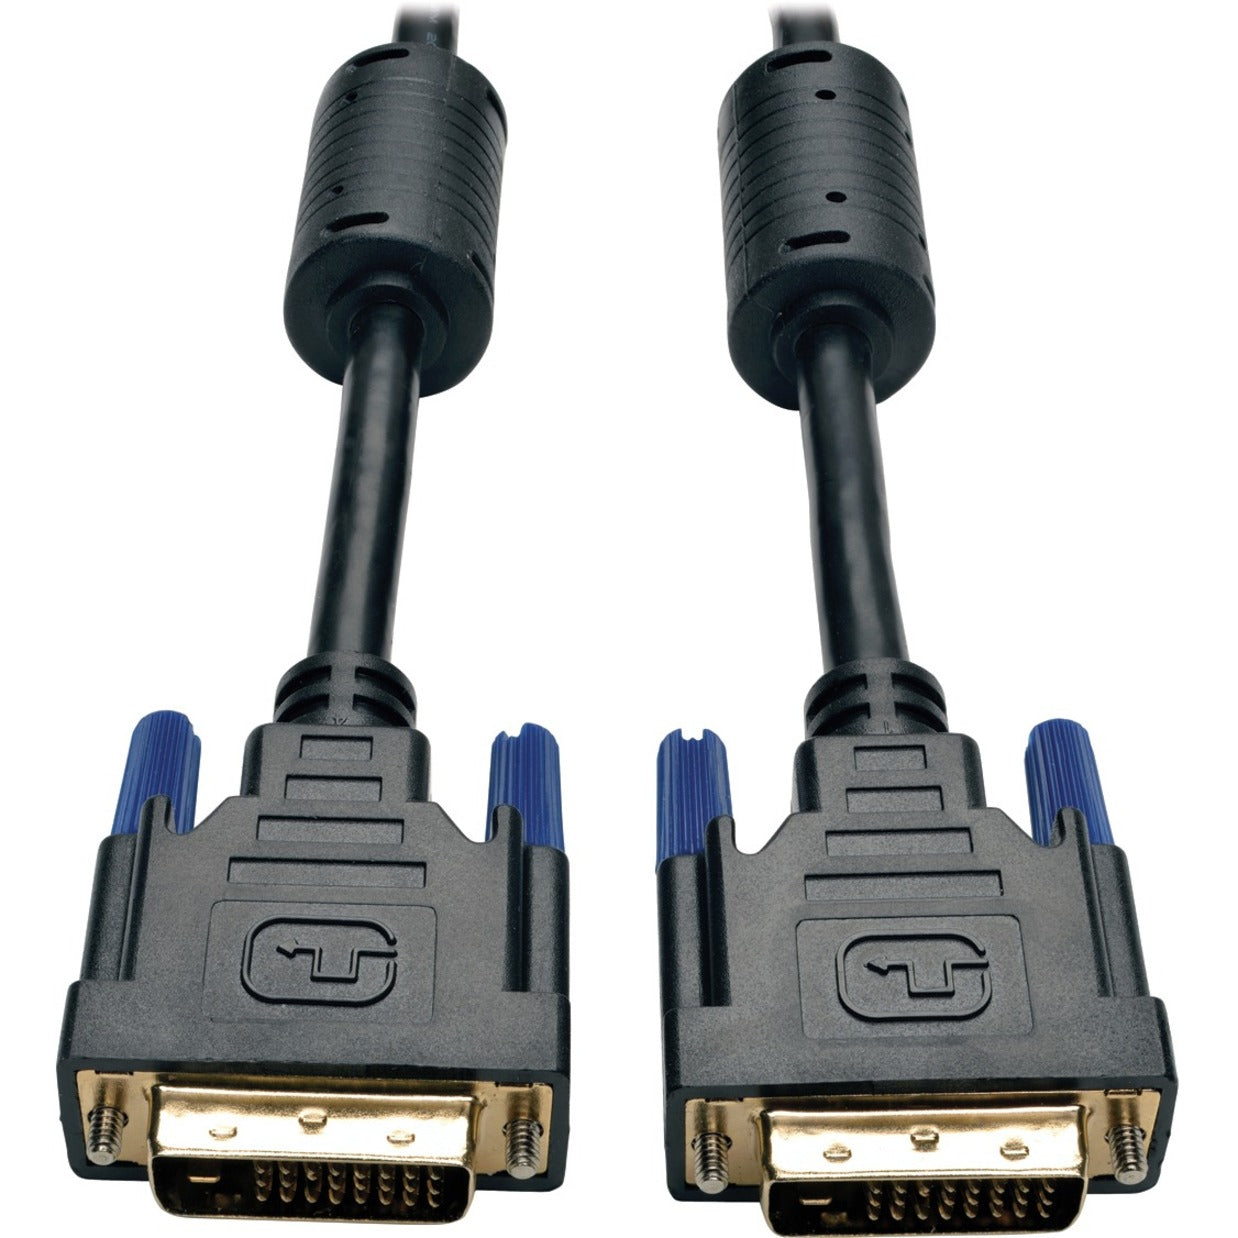 Tripp Lite P560-001 1-ft. DVI Dual Link TMDS Cable, Molded, Copper Conductor, Shielded, Gold Plated Connectors, 1 ft Length, Black